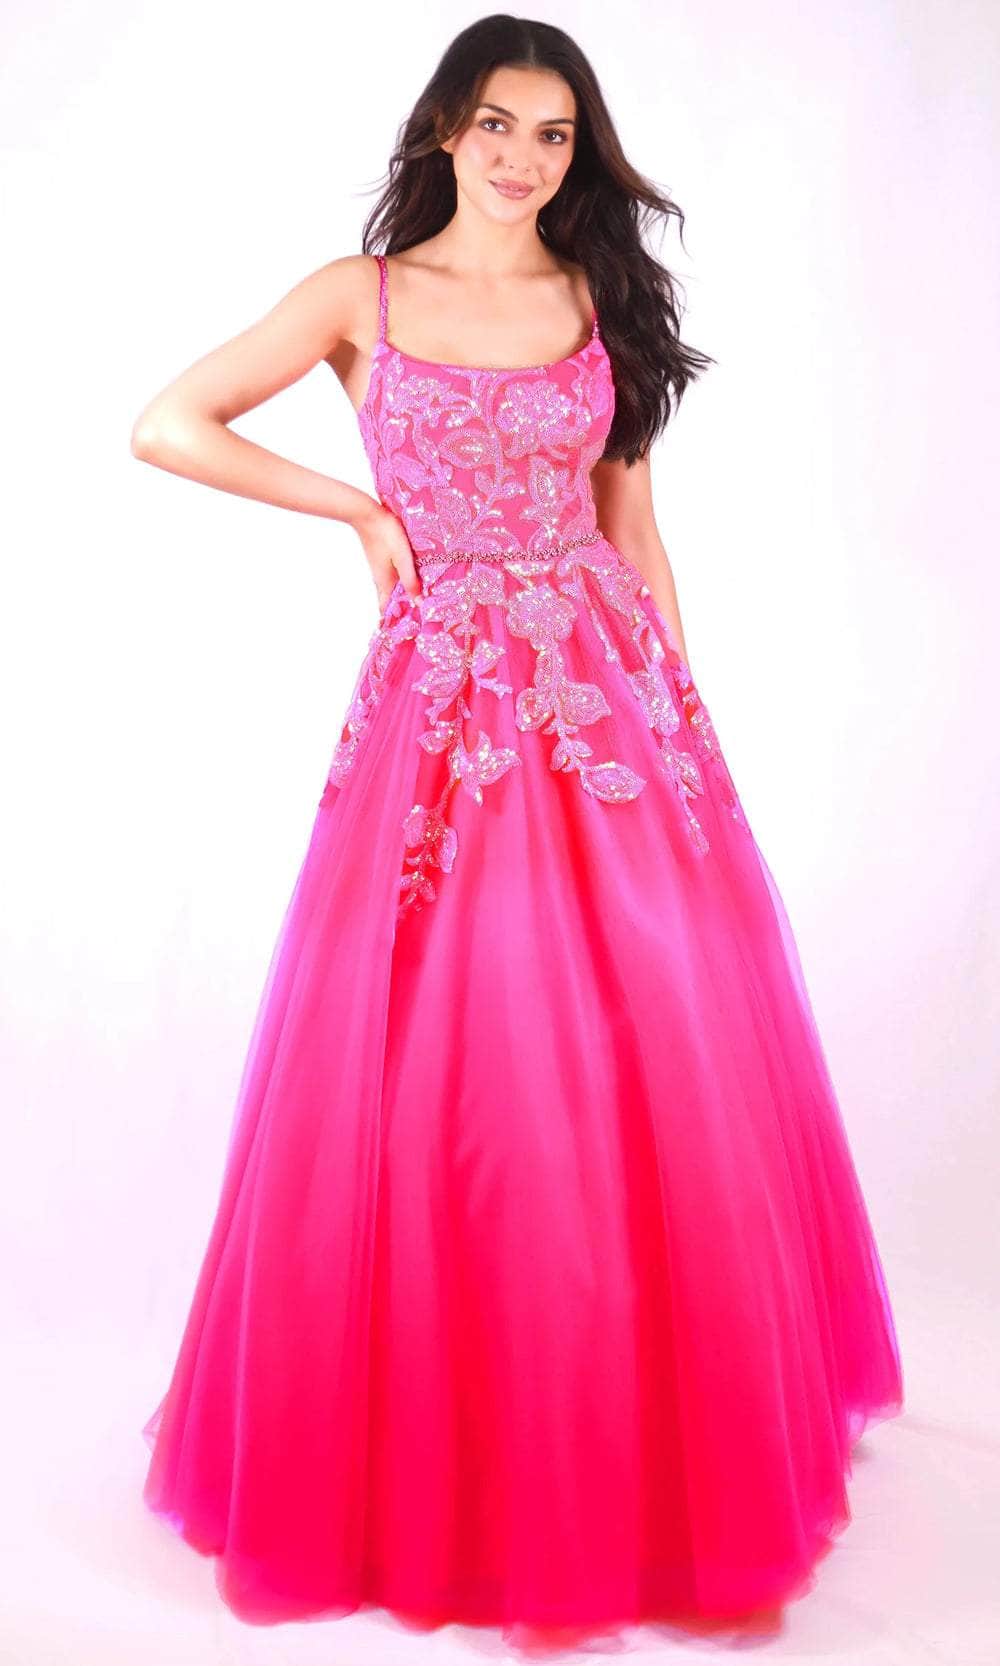 Image of Ava Presley 27765 - Sequin Appliqued Scoop Prom Gown